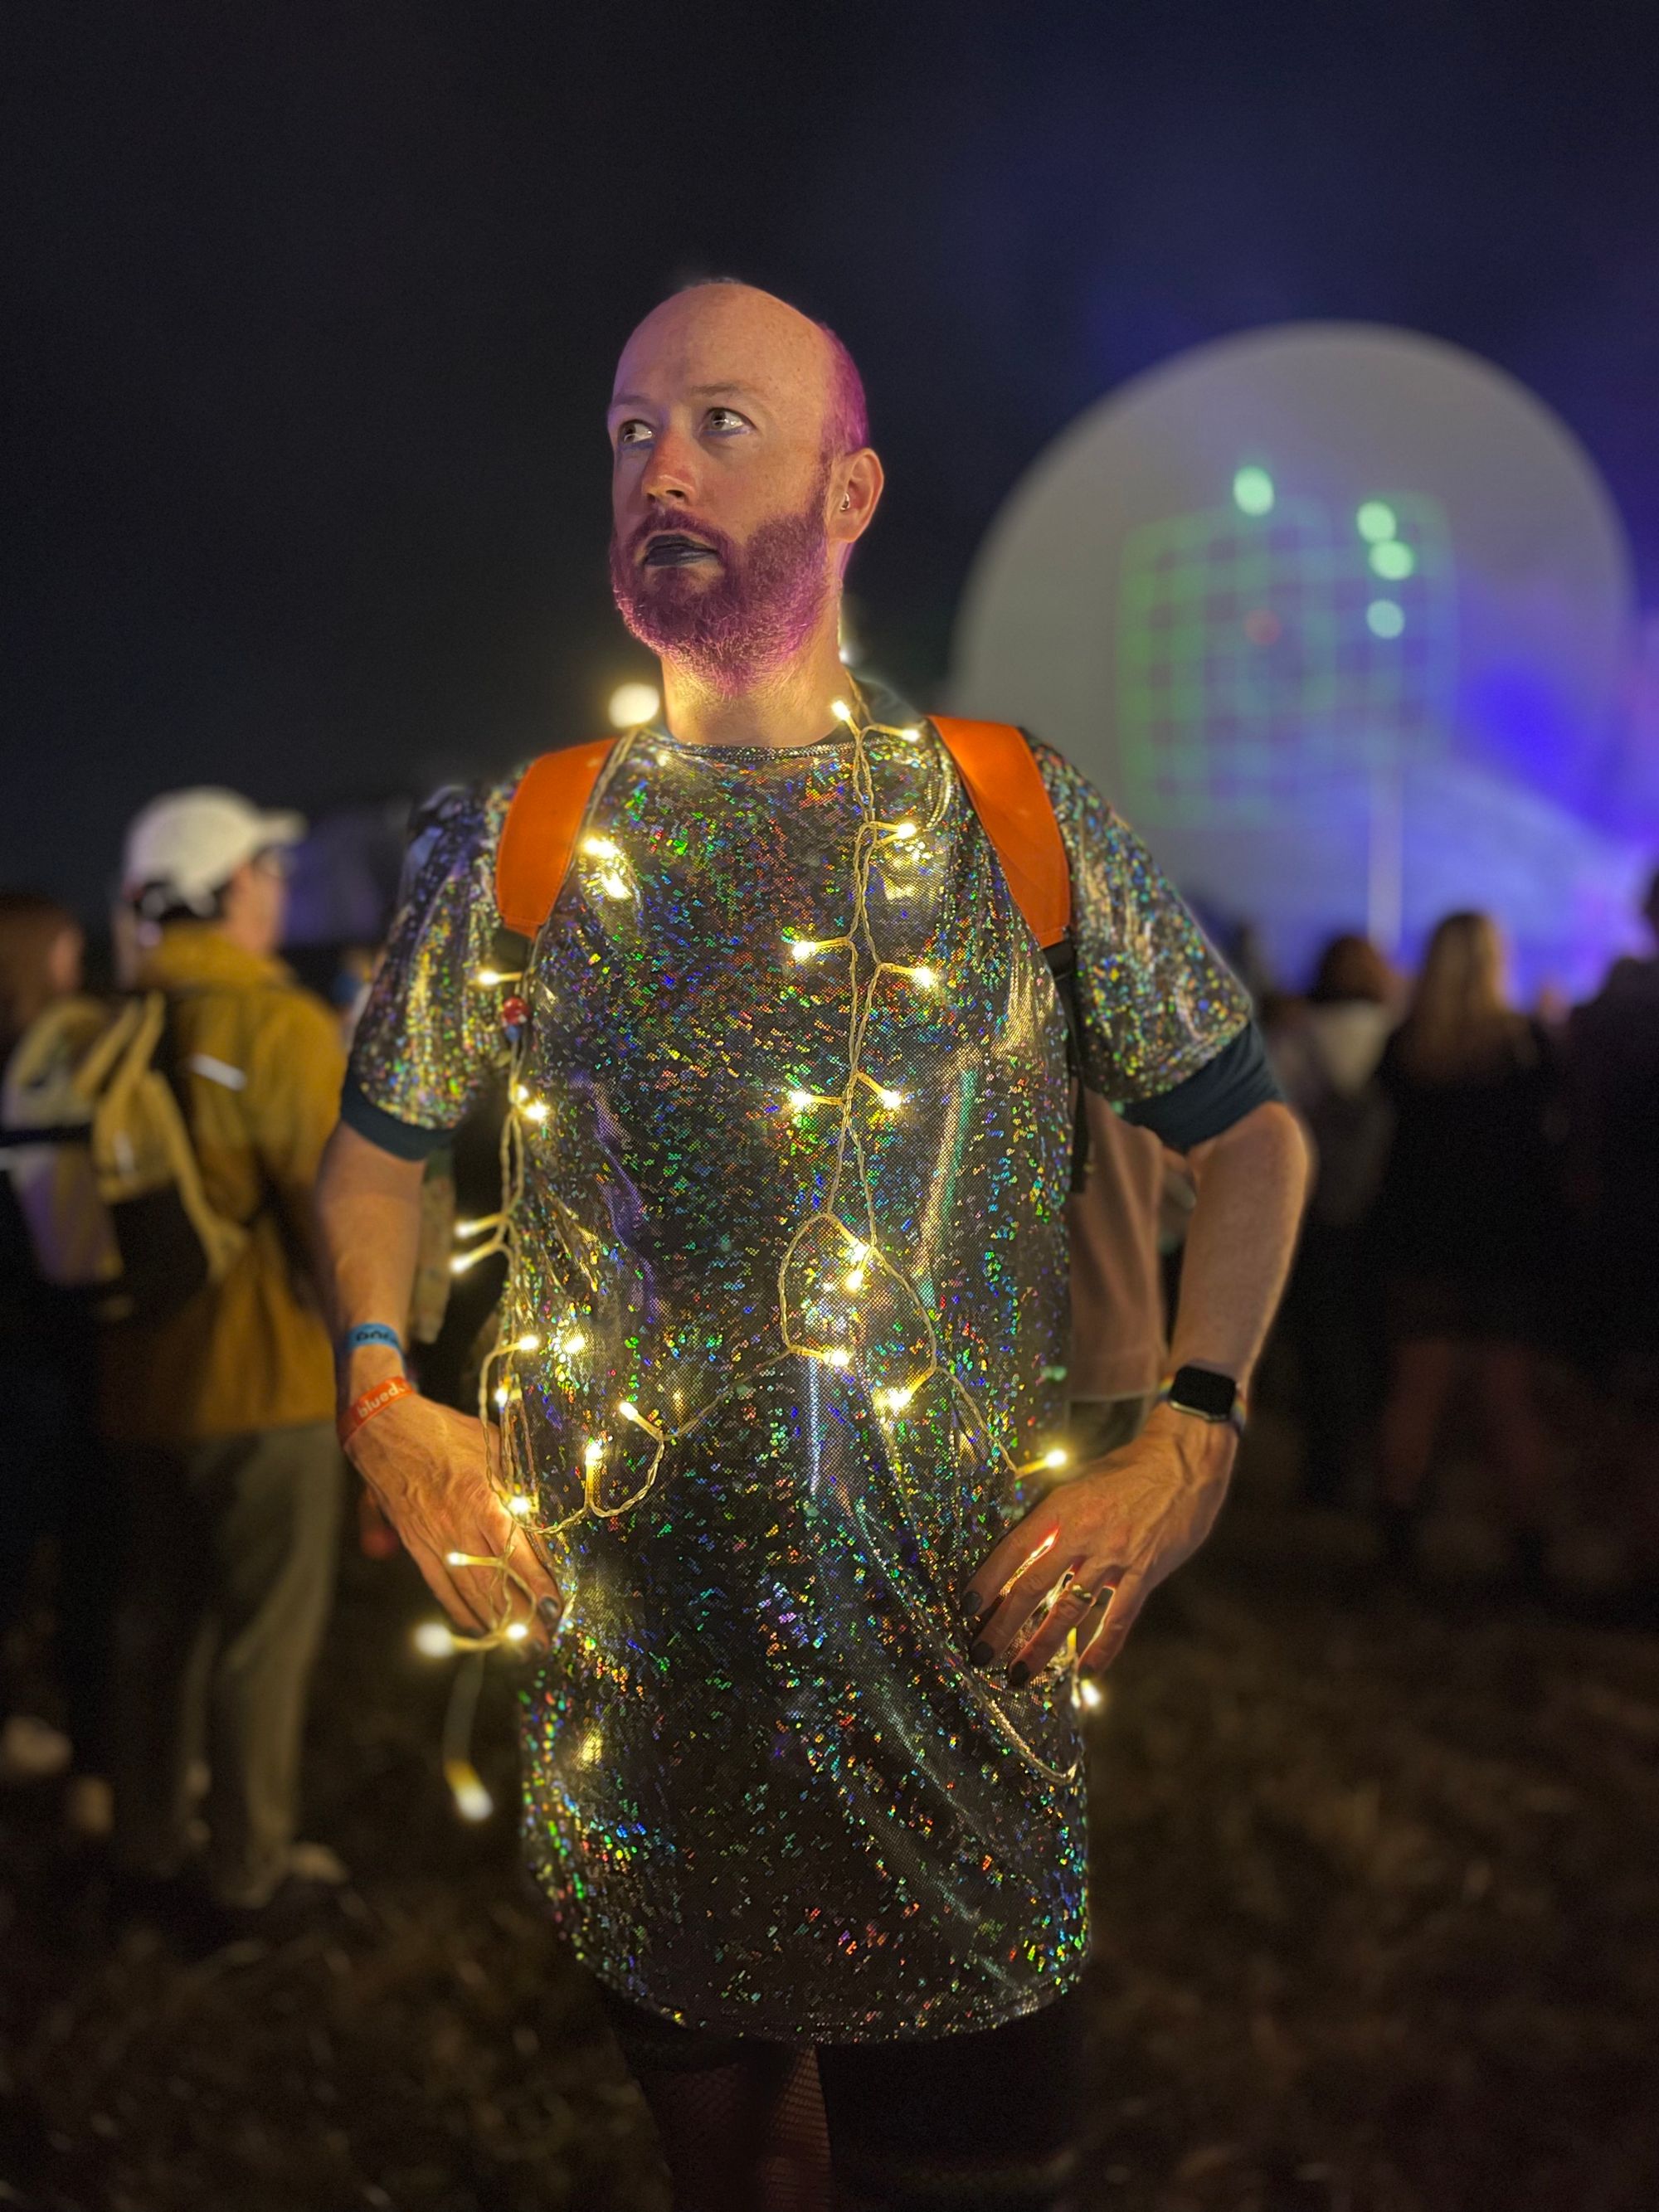 Non-binary person in sparkly dress wearing led lights standing in front of a radio telescope.